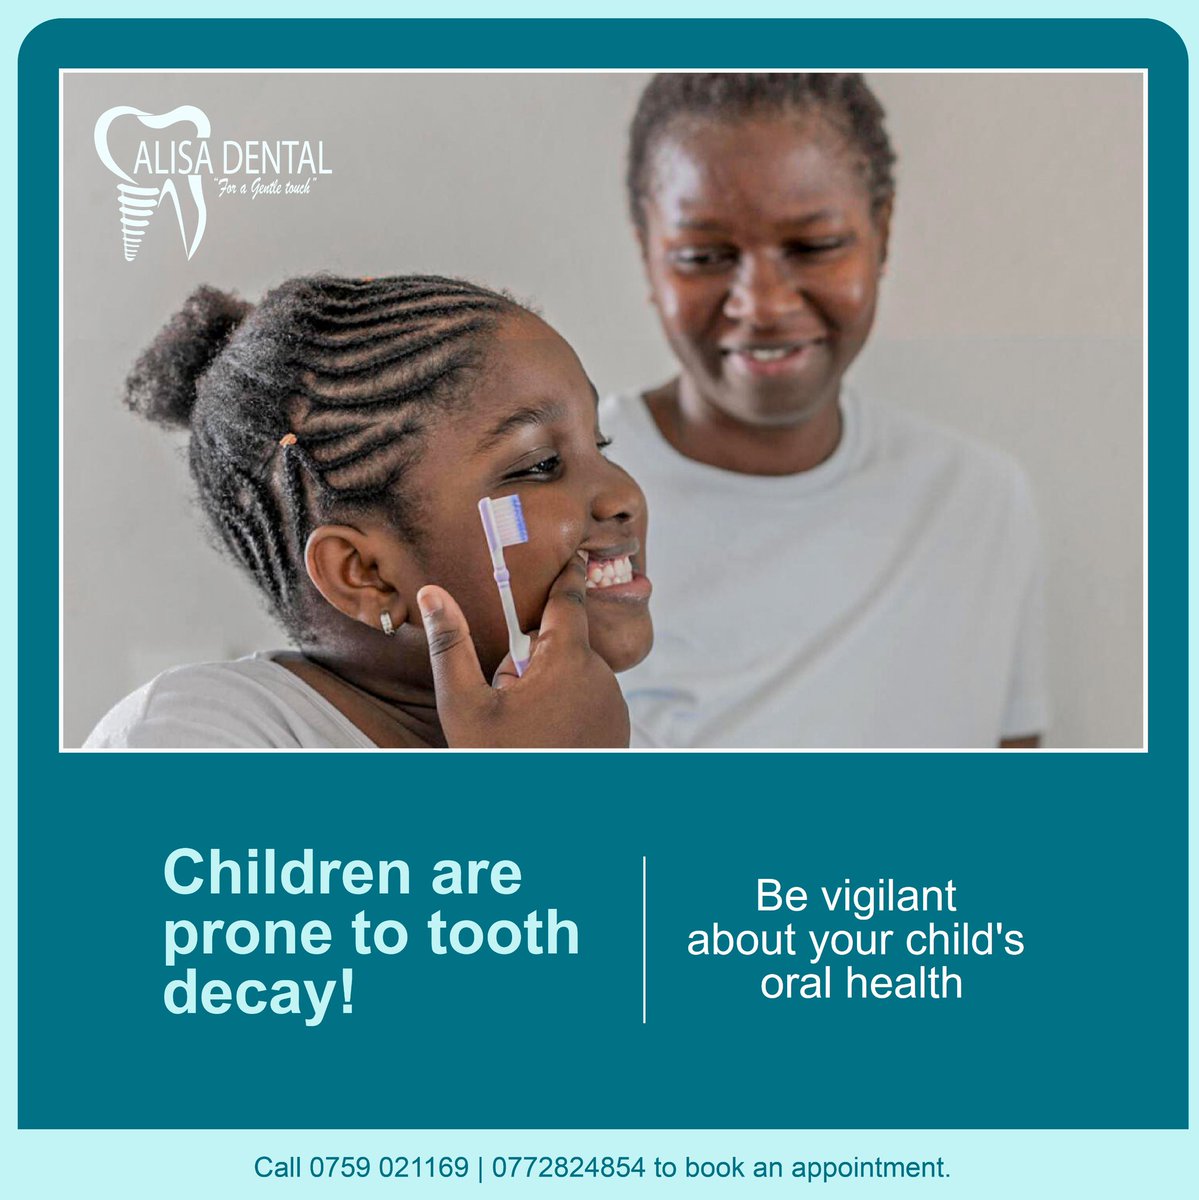 Research suggests that approximately 7 school children out of 10 may experience tooth decay!
Ensure that your child receives a thorough dental check up before and after school.

Visit alisadentalservices.com or call 0759021169 | 0772824854 to book your appointment.
#toothdecay